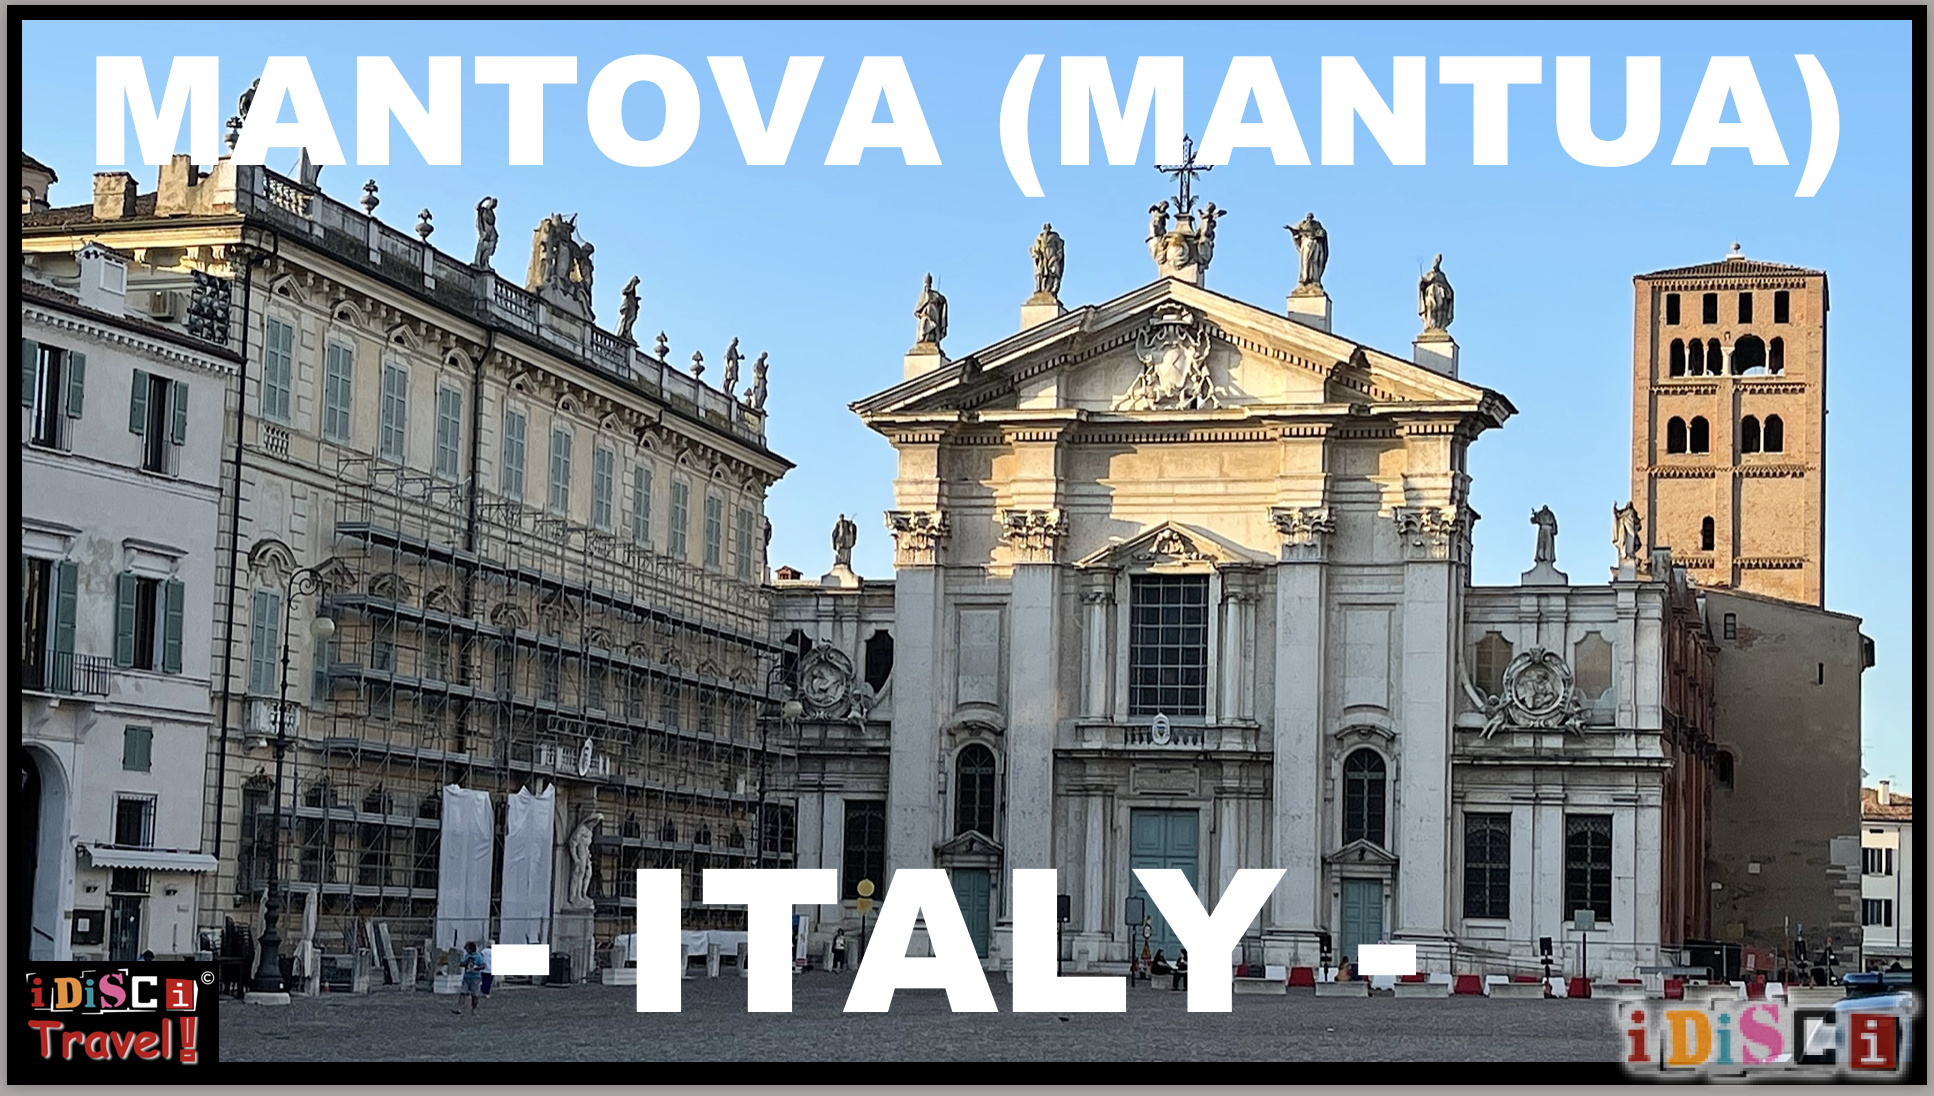 Mantova Italy, Mantua Italy, South of Verona, Veneto, Lombardy, Lake Garda, Northern Italy, 16th century, Middle Ages, Renaissance Architecture, iDiSCi-Travel, Private Tours in Europe,